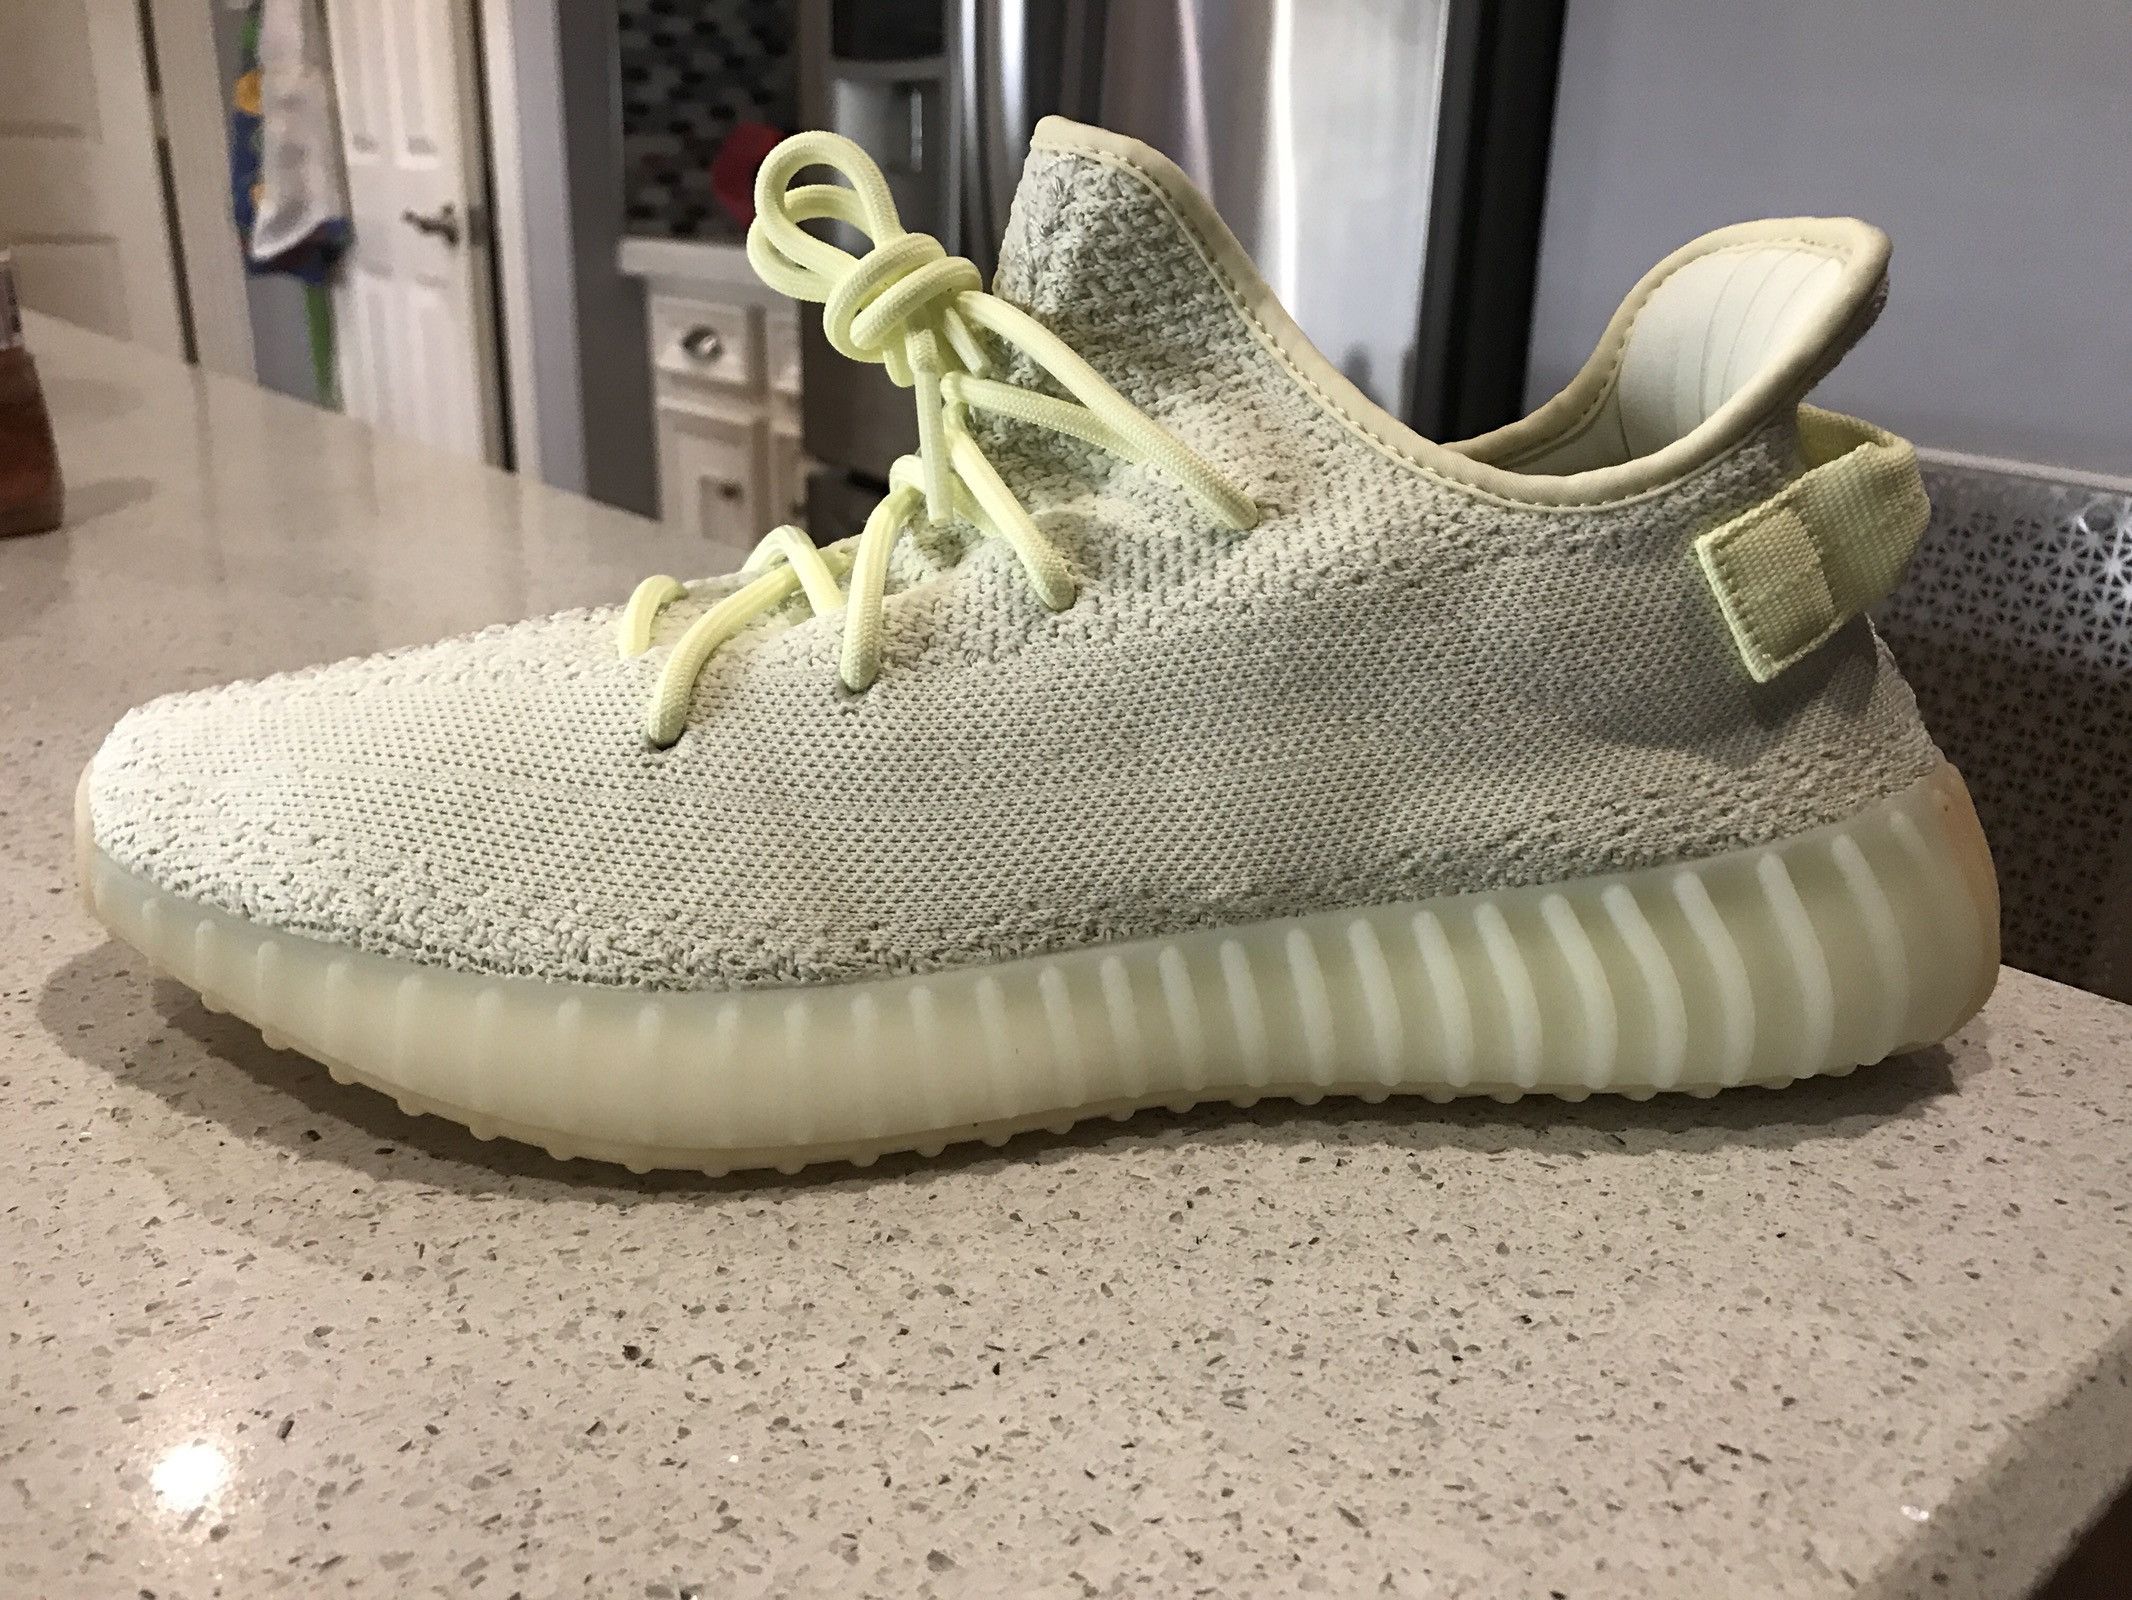 Adidas Yeezy Butters | Grailed